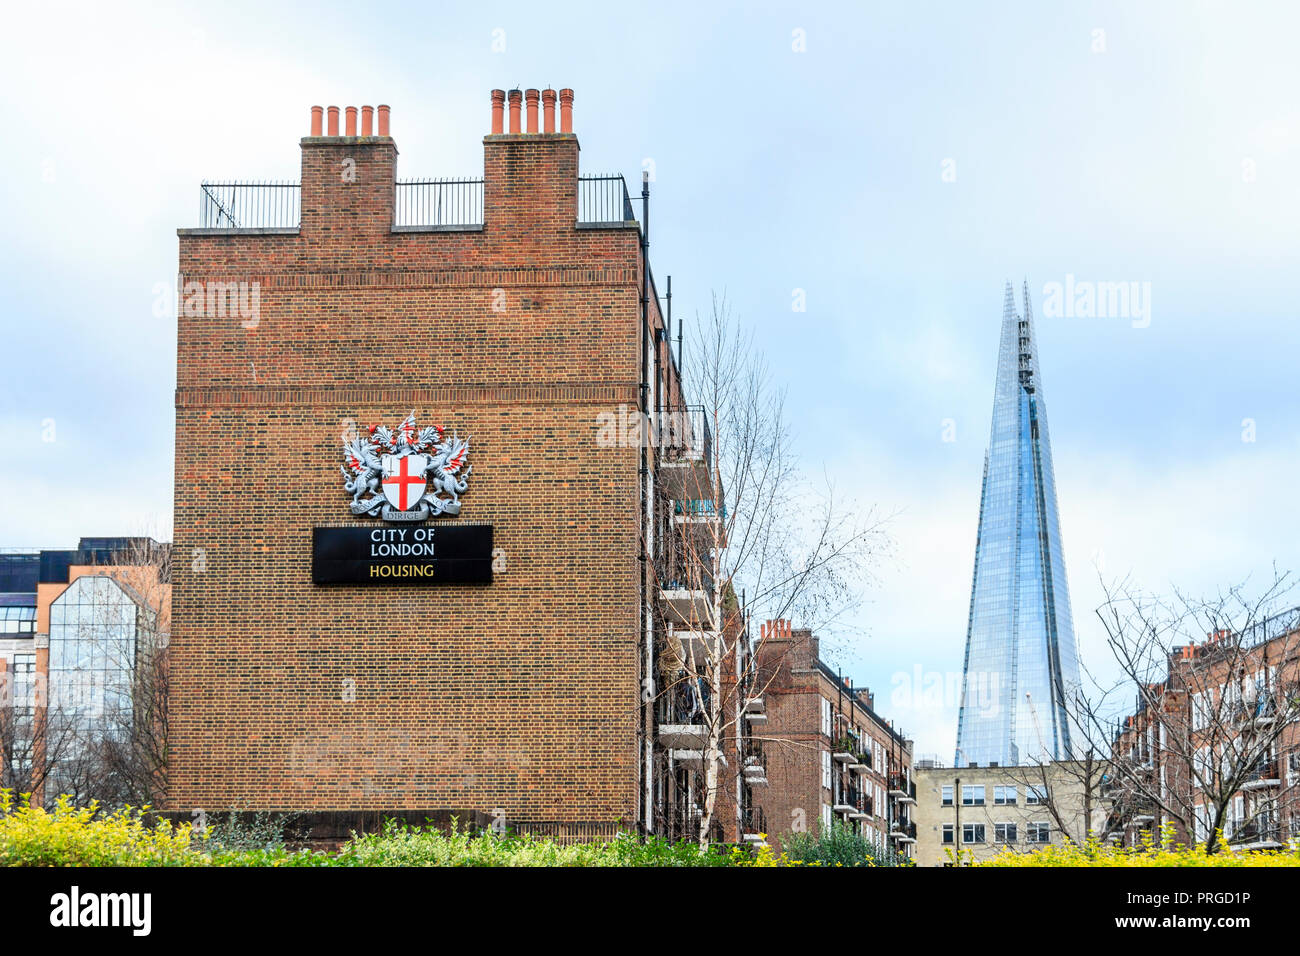 City of London housing estate in Great Guildford Street, Southwark, London, UK, the Shard in the background Stock Photo